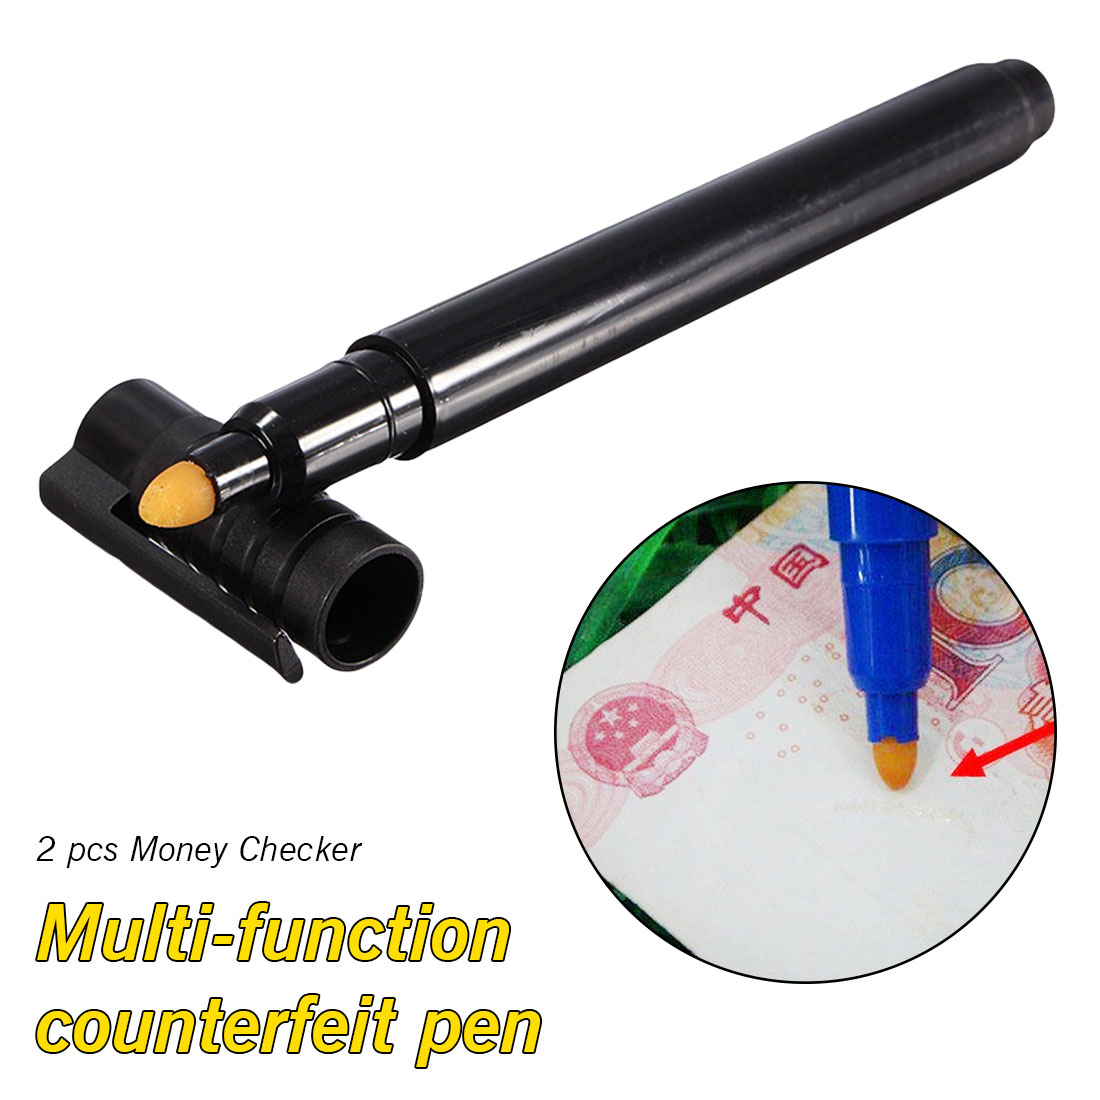 2Pcs Tester Pen Money Detector Currency Detector Counterfeit Marker Fake Banknotes Tester Pen Ink Hand Checking Tools